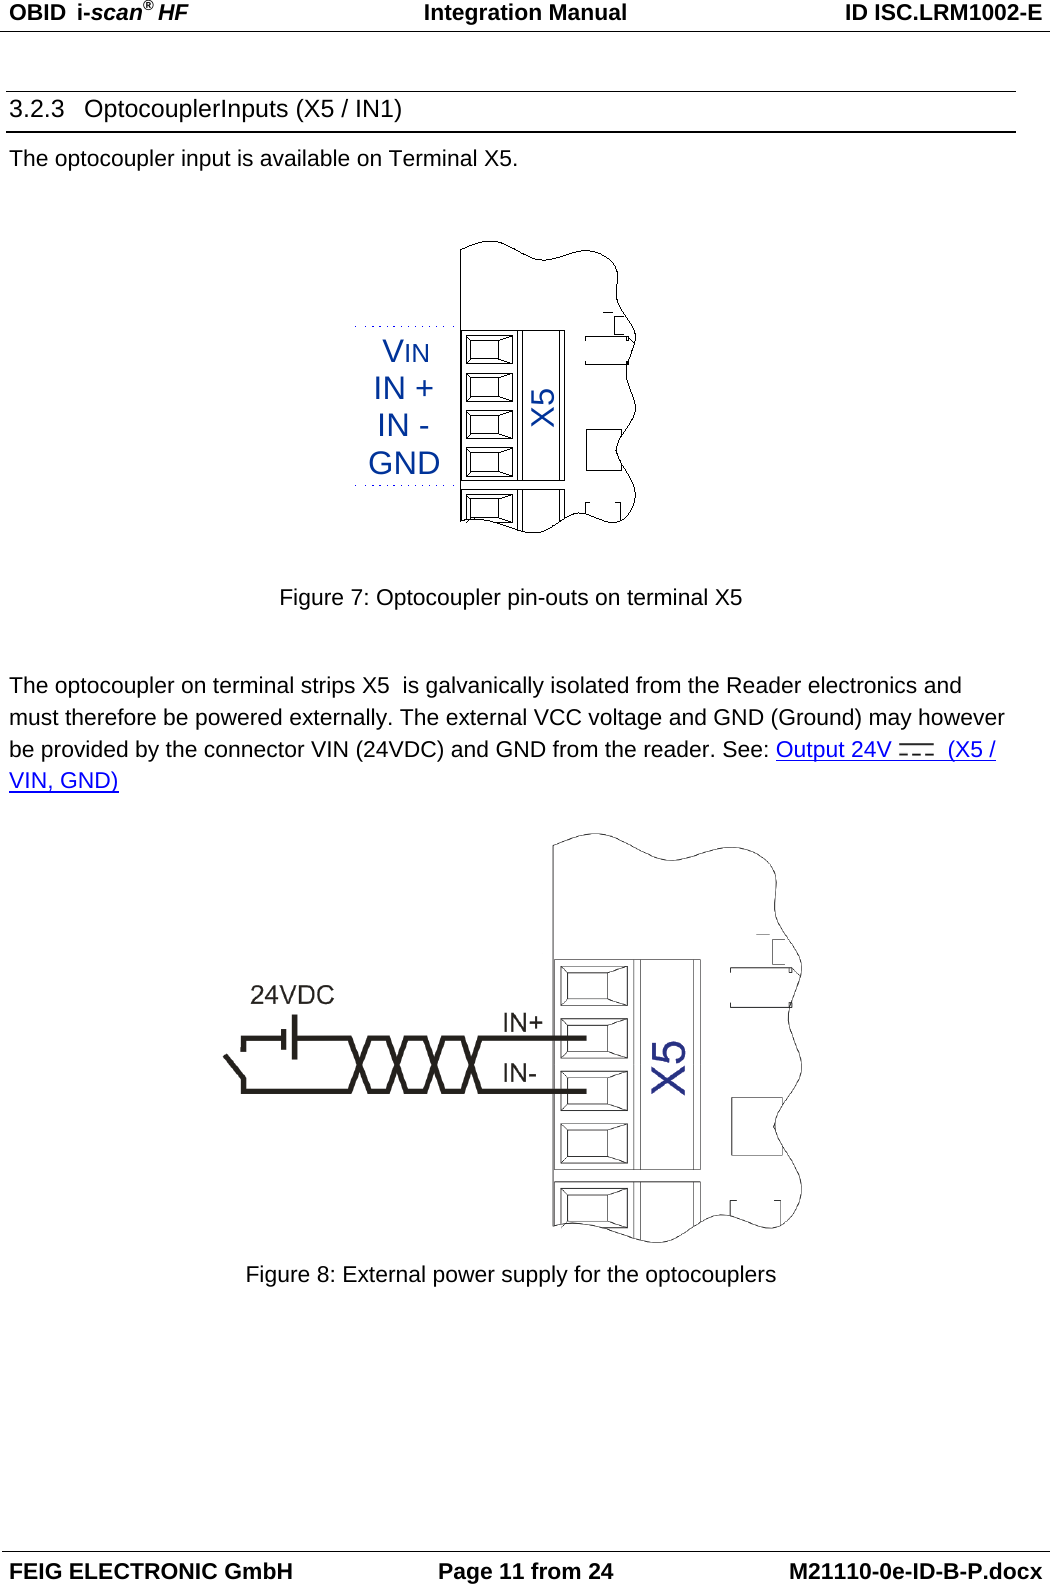 OBID  i-scan® HF Integration Manual ID ISC.LRM1002-E  FEIG ELECTRONIC GmbH Page 11 from 24 M21110-0e-ID-B-P.docx  3.2.3 OptocouplerInputs (X5 / IN1) The optocoupler input is available on Terminal X5.  GNDVININ -IN +X5 Figure 7: Optocoupler pin-outs on terminal X5  The optocoupler on terminal strips X5  is galvanically isolated from the Reader electronics and must therefore be powered externally. The external VCC voltage and GND (Ground) may however be provided by the connector VIN (24VDC) and GND from the reader. See: Output 24V   (X5 / VIN, GND)   Figure 8: External power supply for the optocouplers  